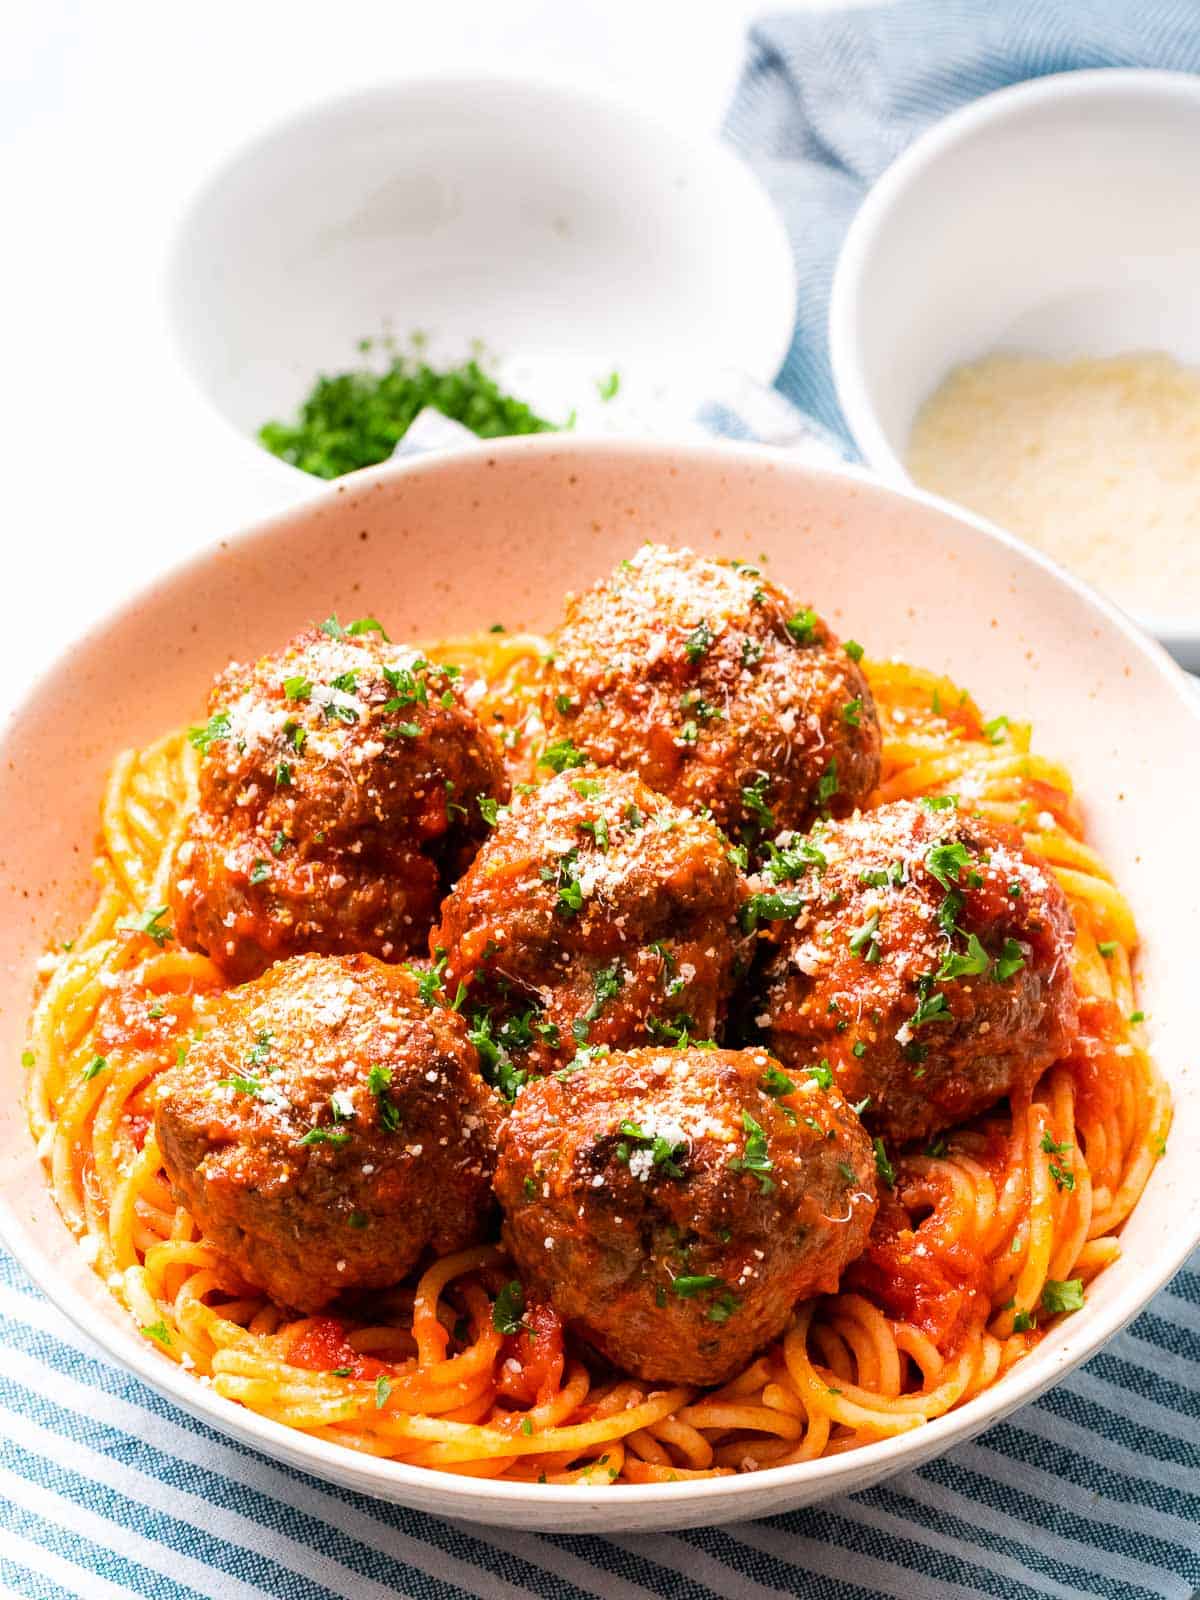 Baked Italian meatballs with parmesan cheese and pasta.